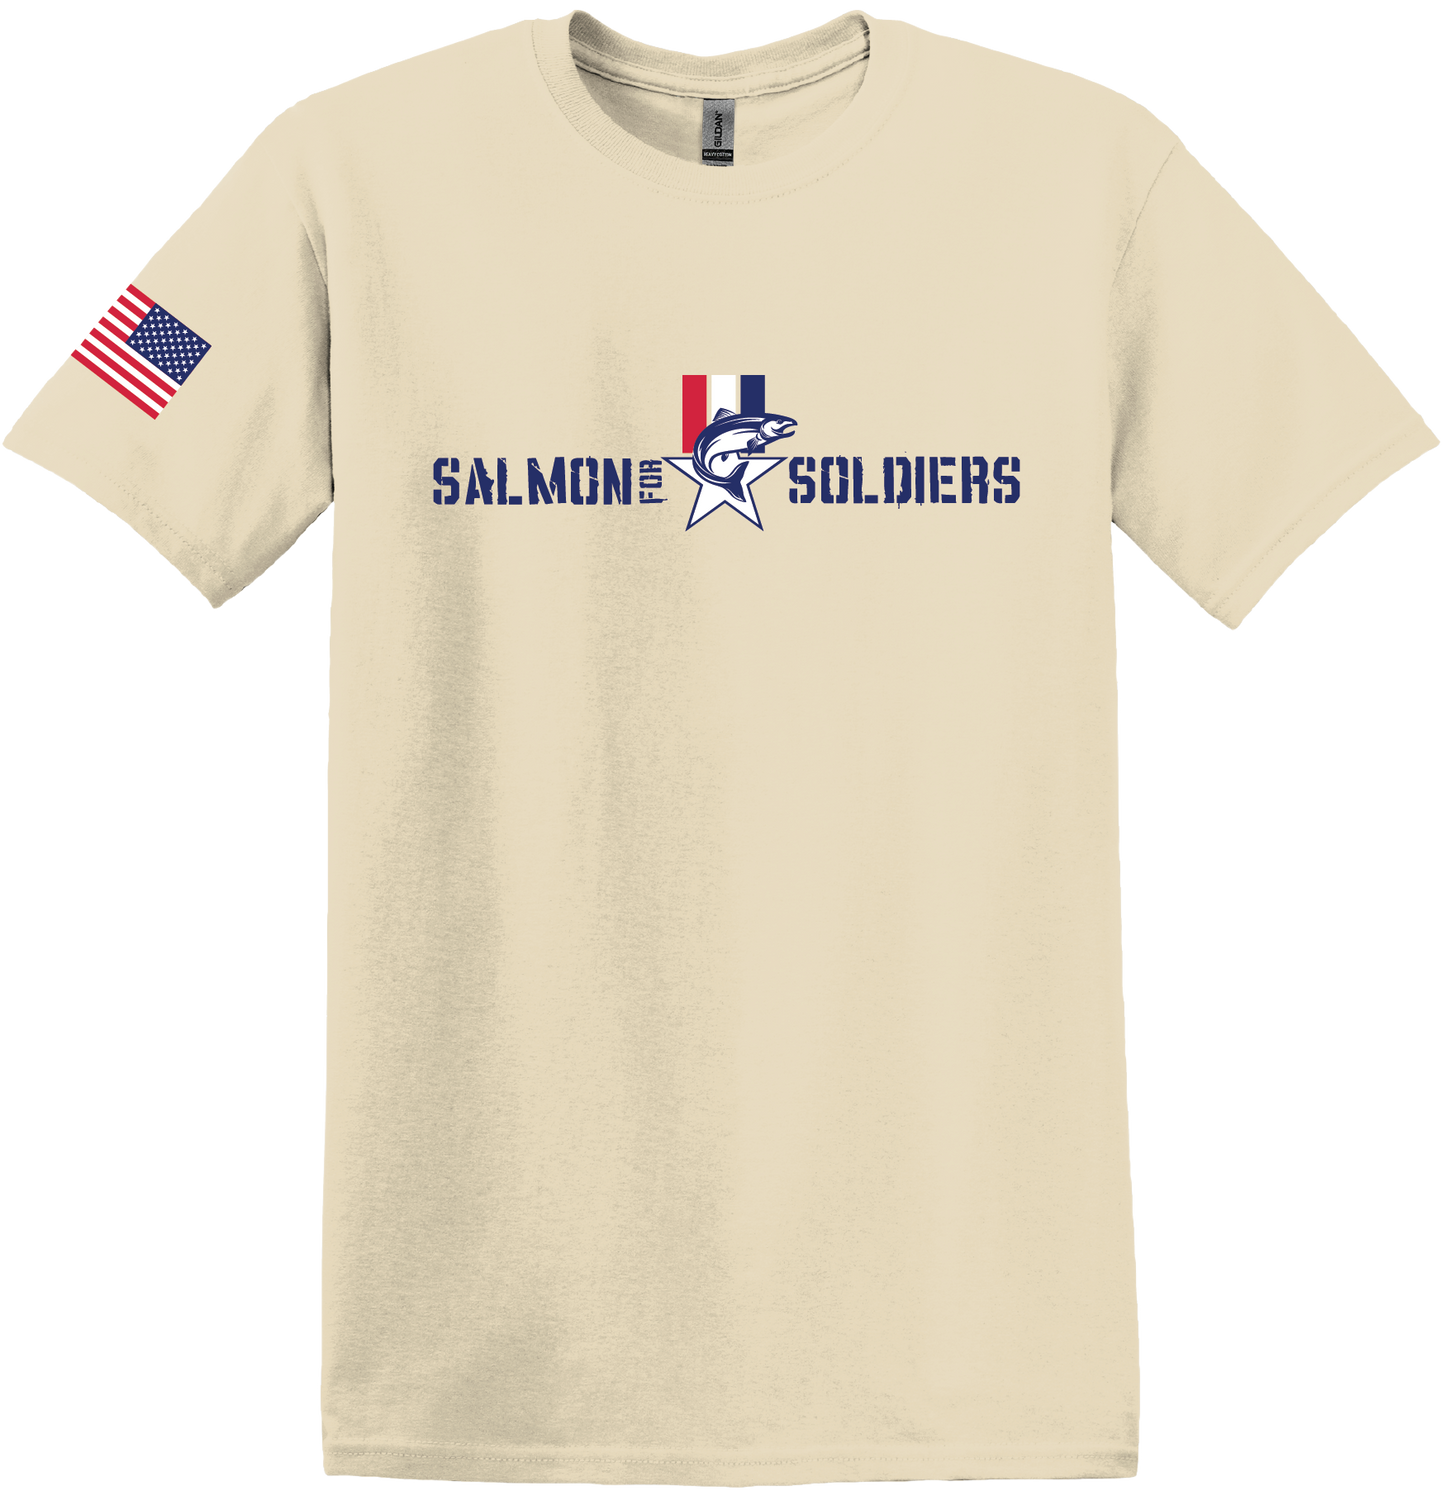 Salmon for Soldiers Logo Tee